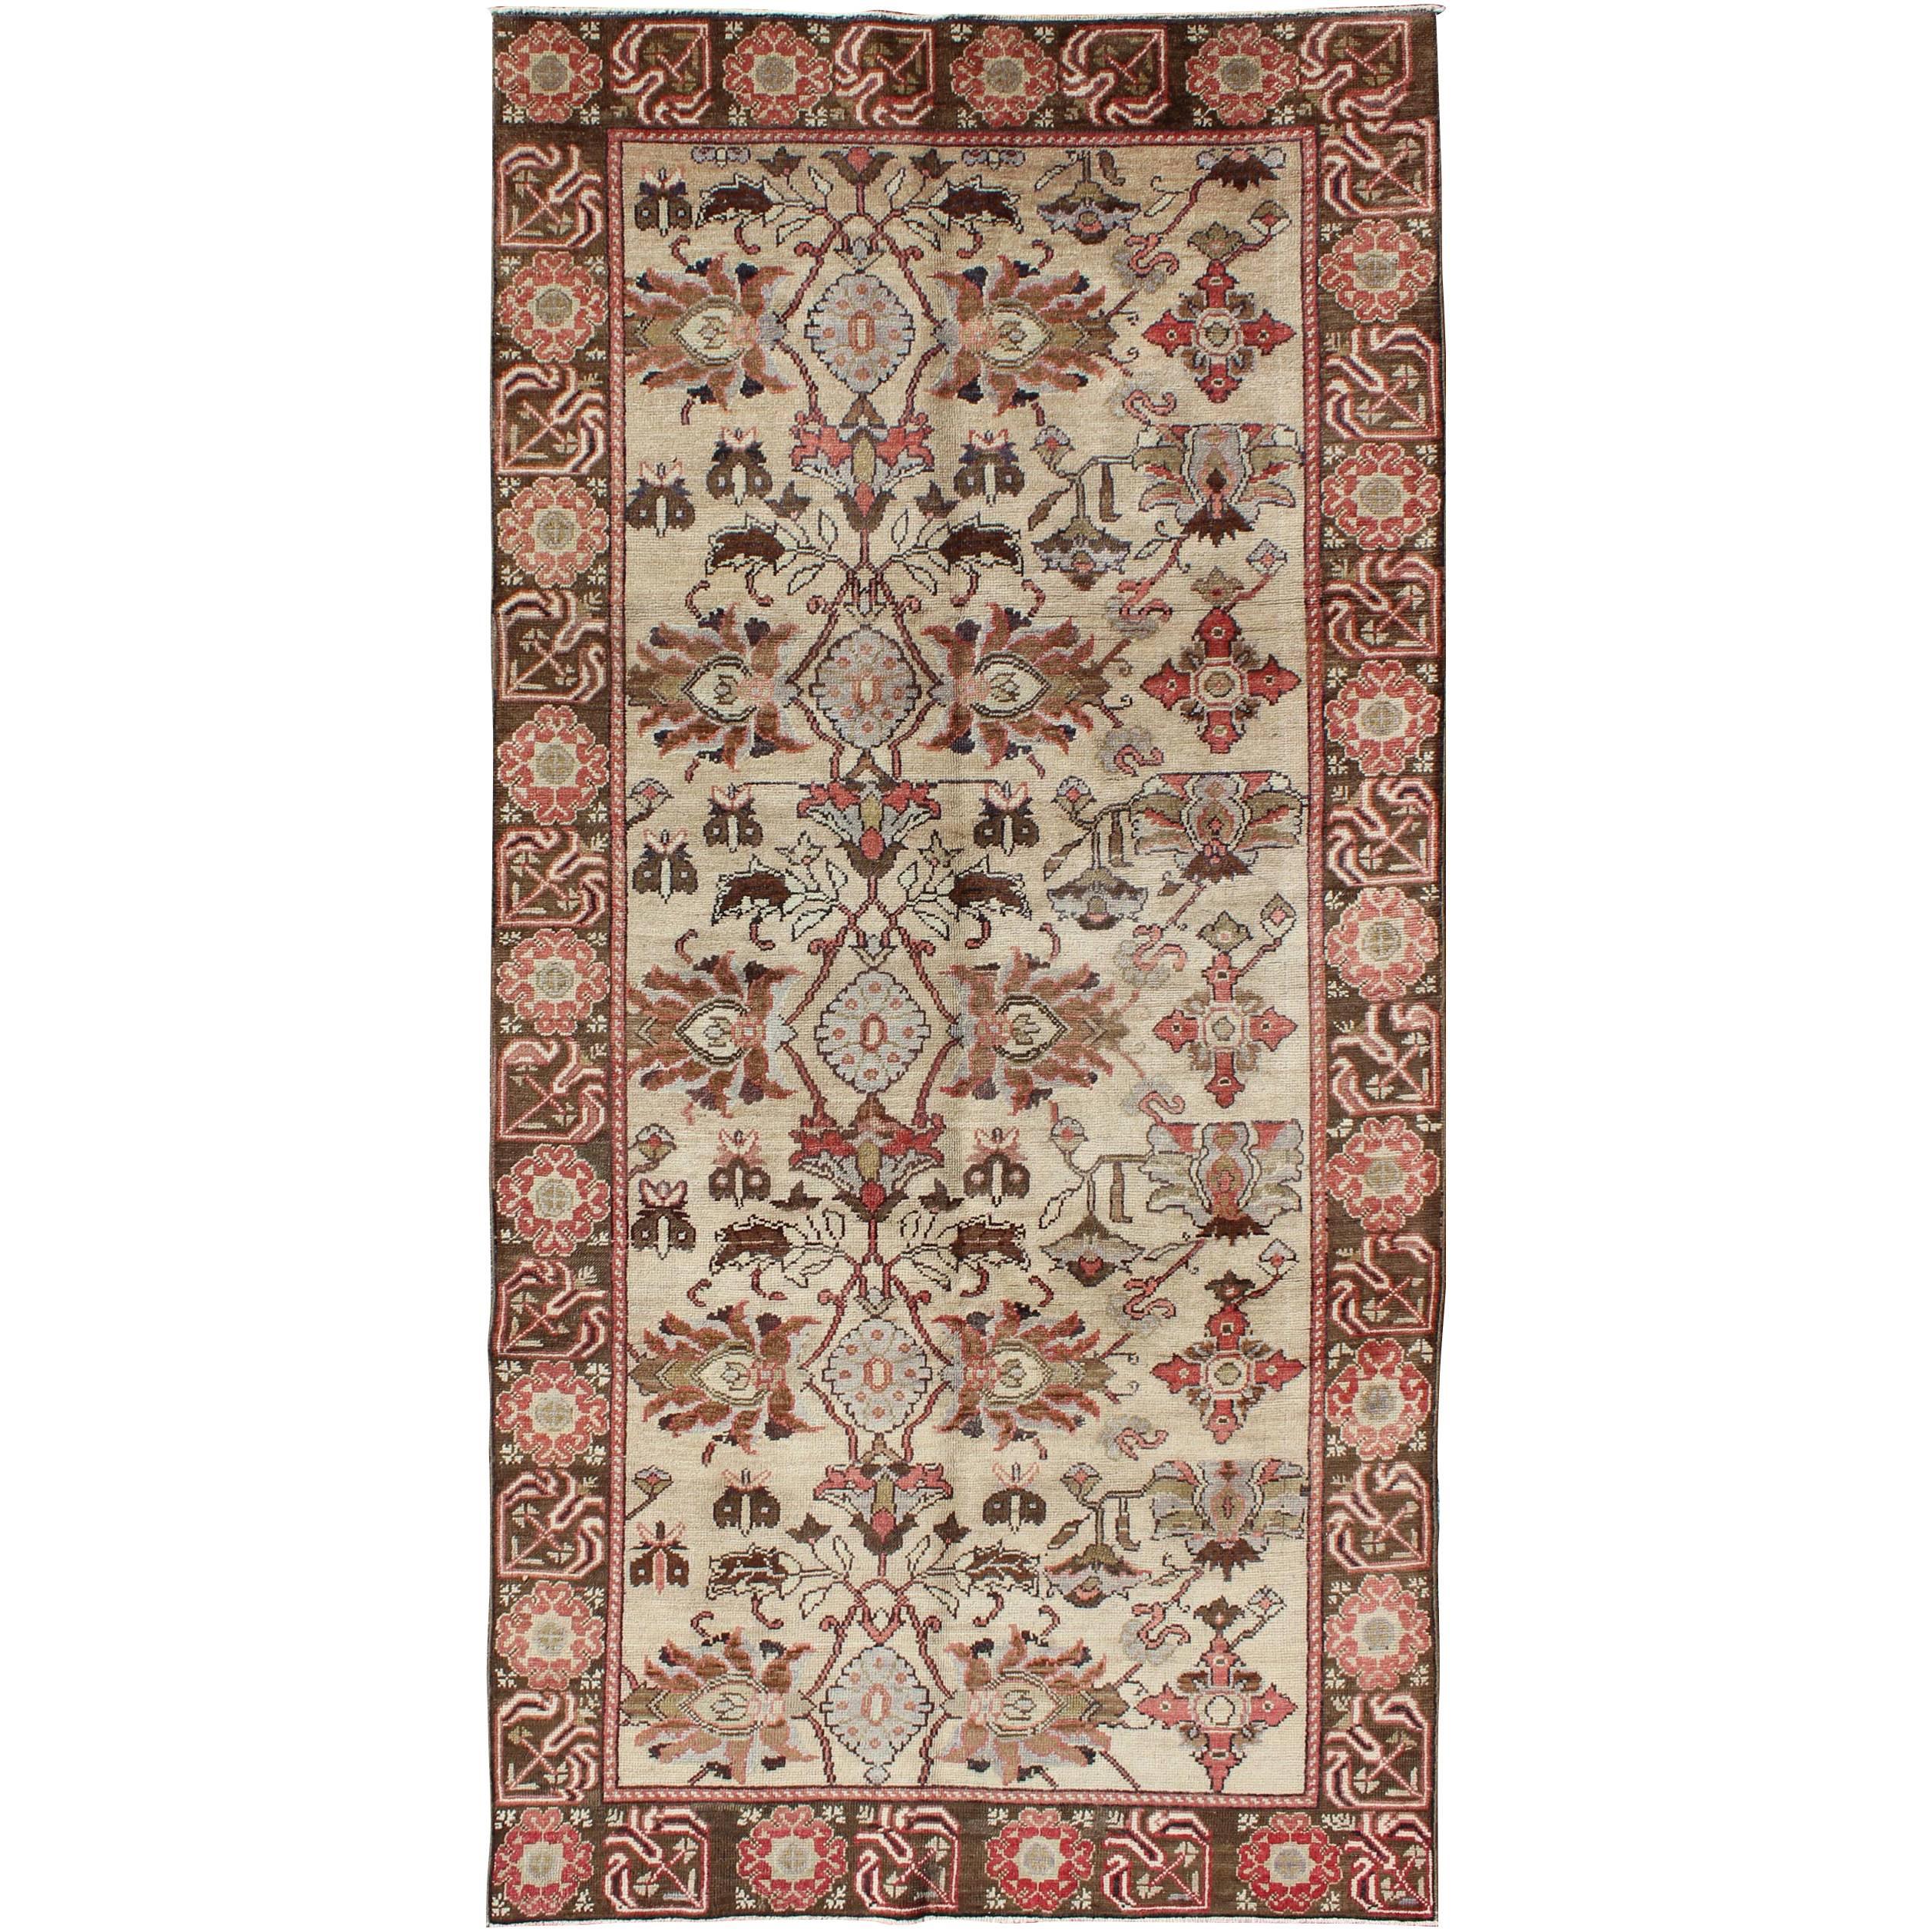 Vintage Oushak Rug from Turkey with All-Over Floral Design in Ivory, Brown & Red